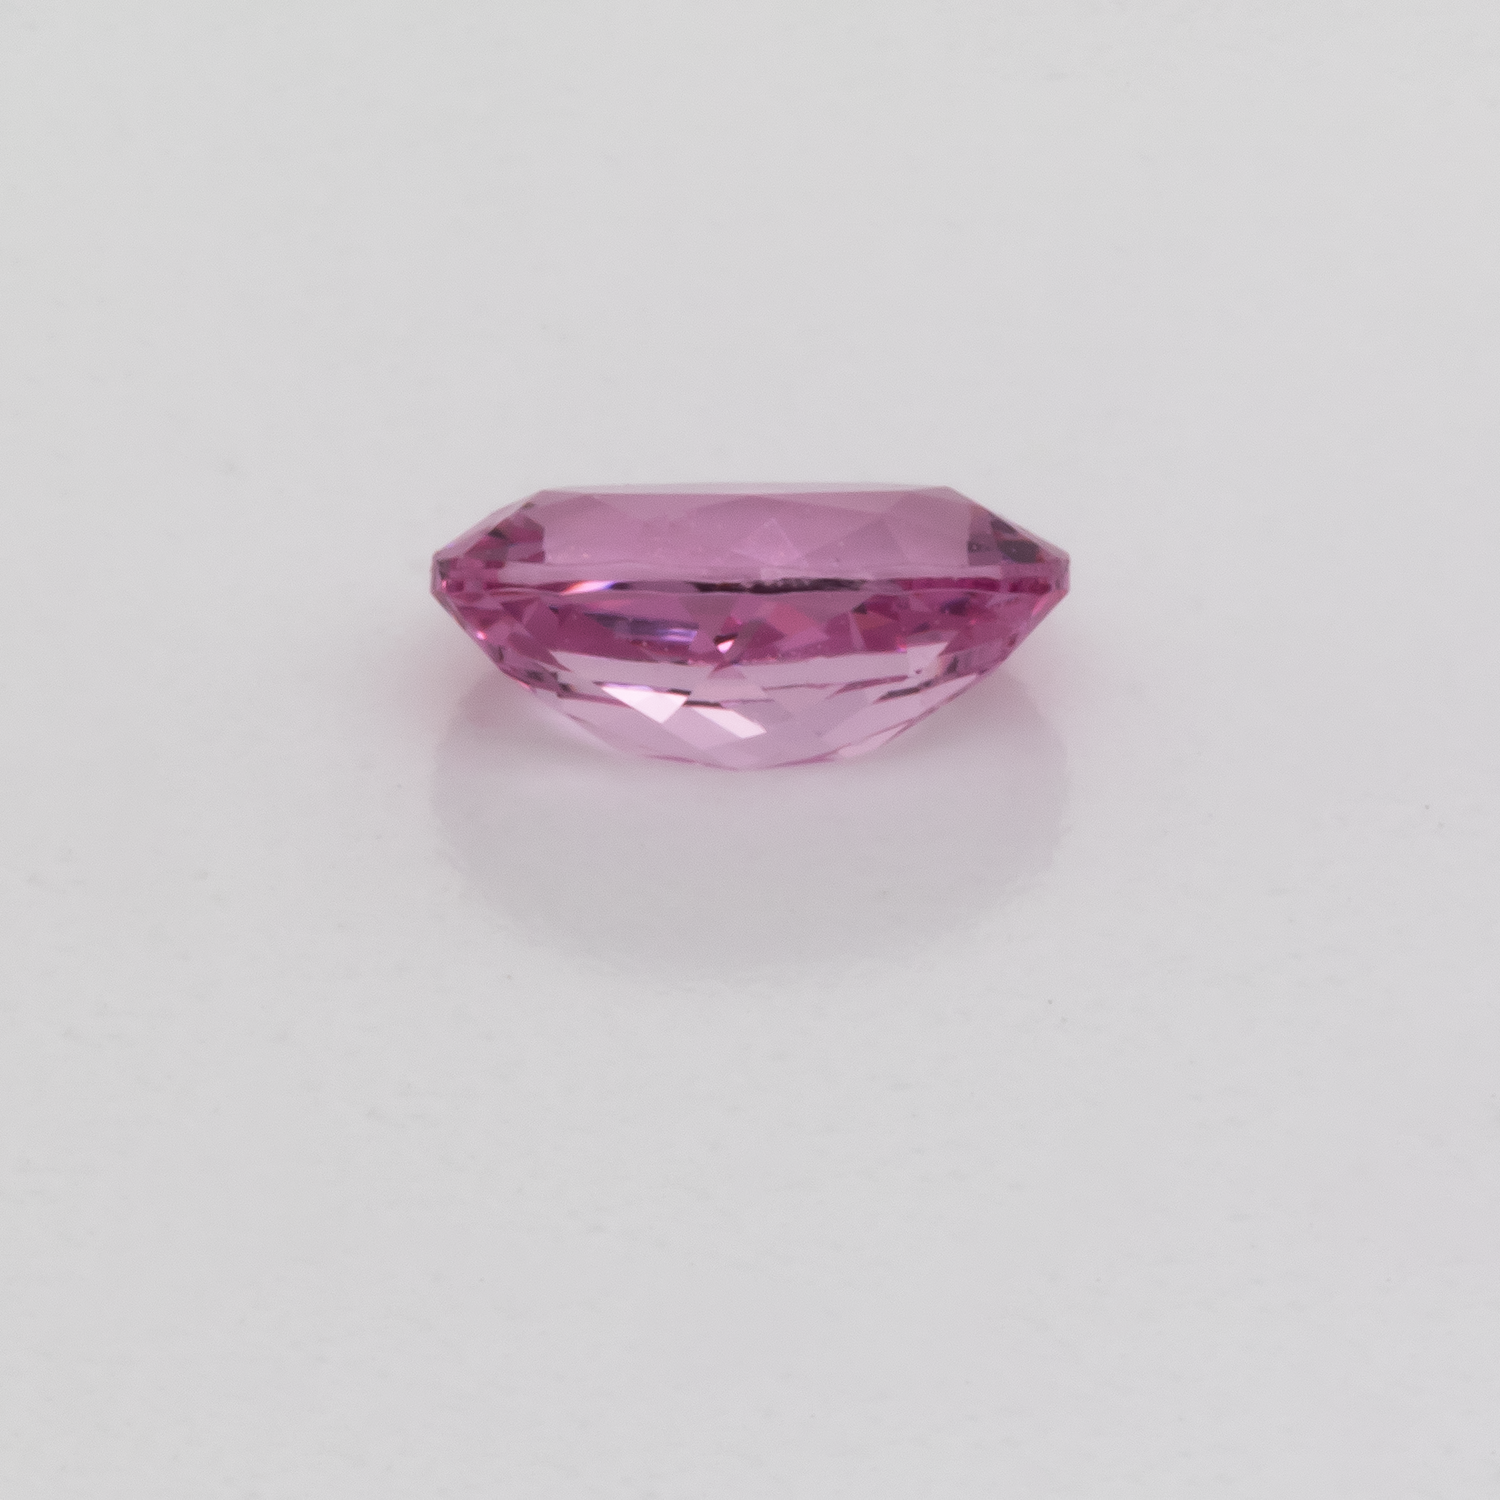 Spinel - pink, oval, 5x3 mm, 0.26 cts, No. SP90025